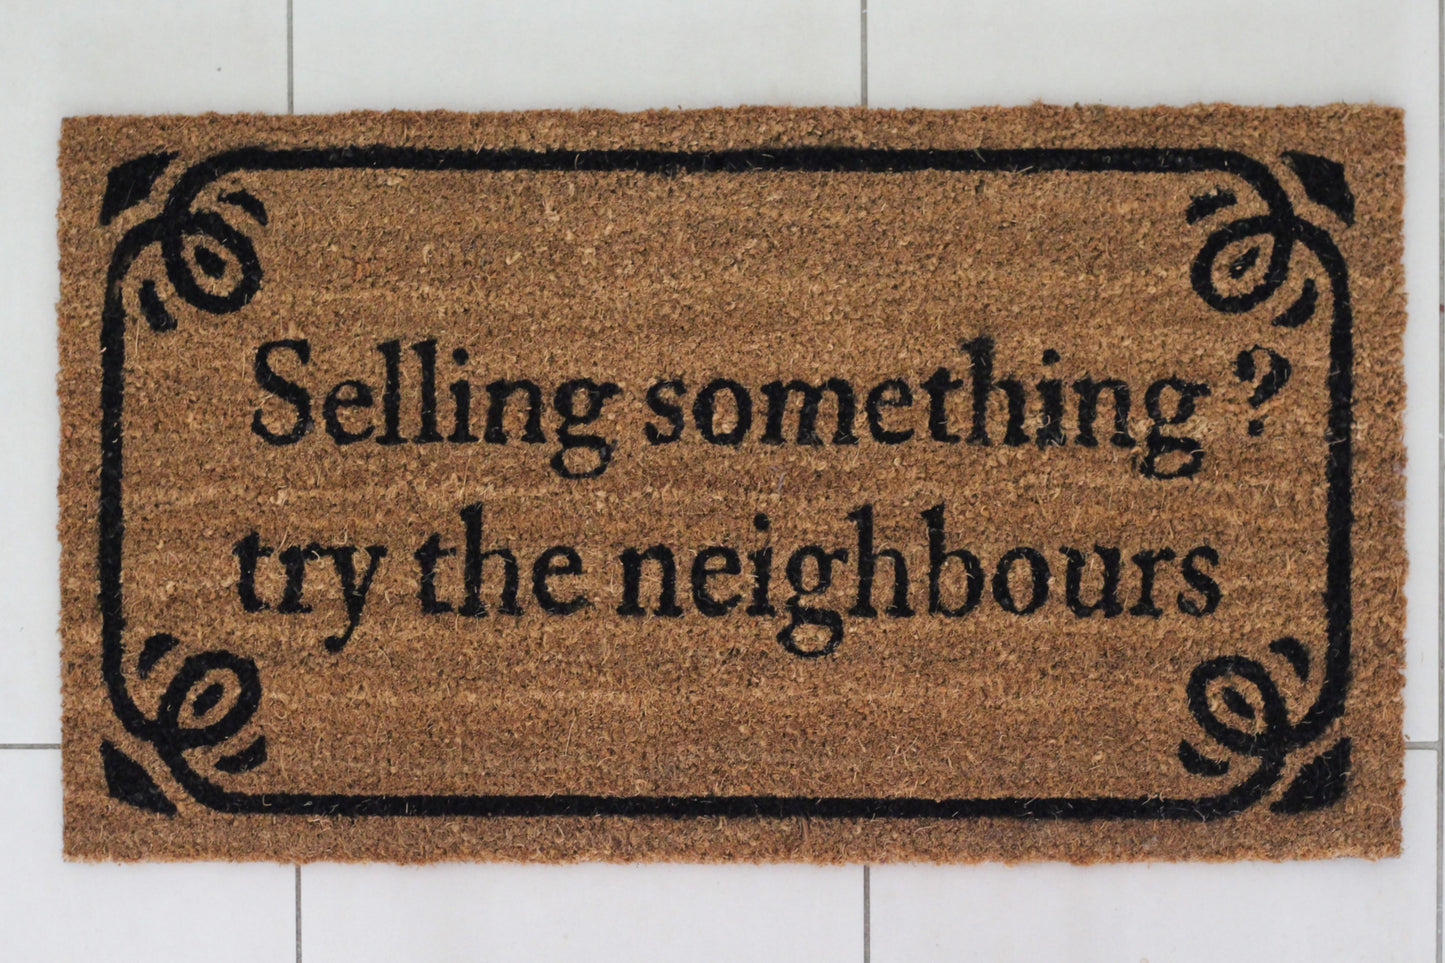 Fussmatte: Selling something? Try the neighbours